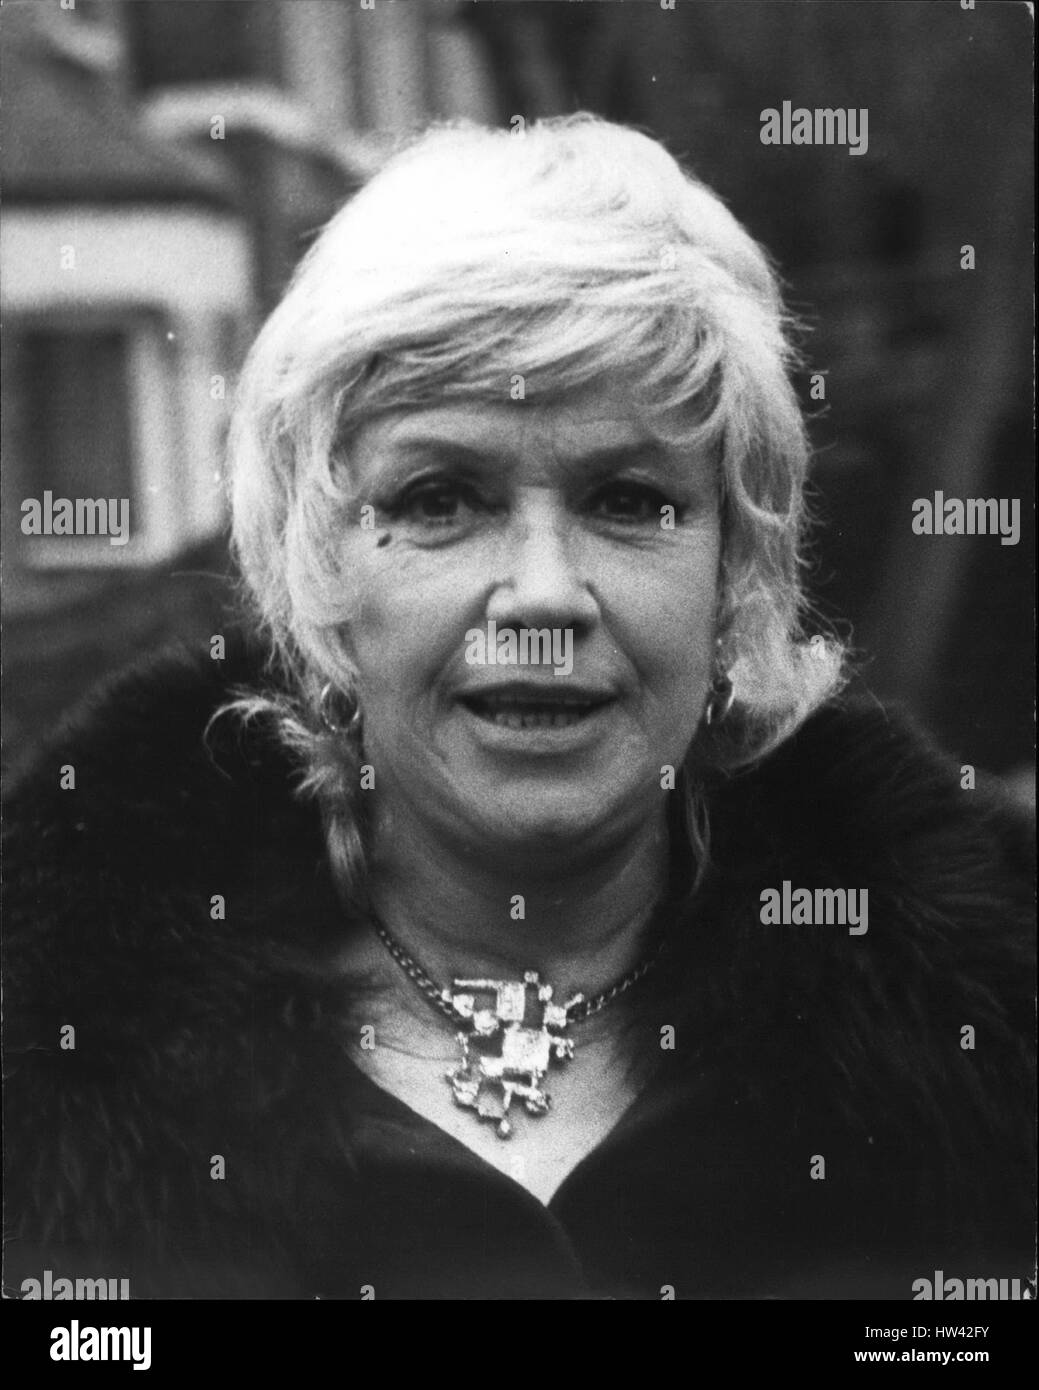 May 05, 1973 - ''Bribery At BBC'' - 15 Arrested. The famous singer Dorothy Squires was arrested today in connection with allegations that BBC producers were bridbed to broadcast pop records. Warrants were issued for the detention of 14 other people, including Janie Jones, West End hostess and former model. Photo Shows:- Singer Dorothy Squires. (Credit Image: © Keystone Press Agency/Keystone USA via ZUMAPRESS.com) Stock Photo